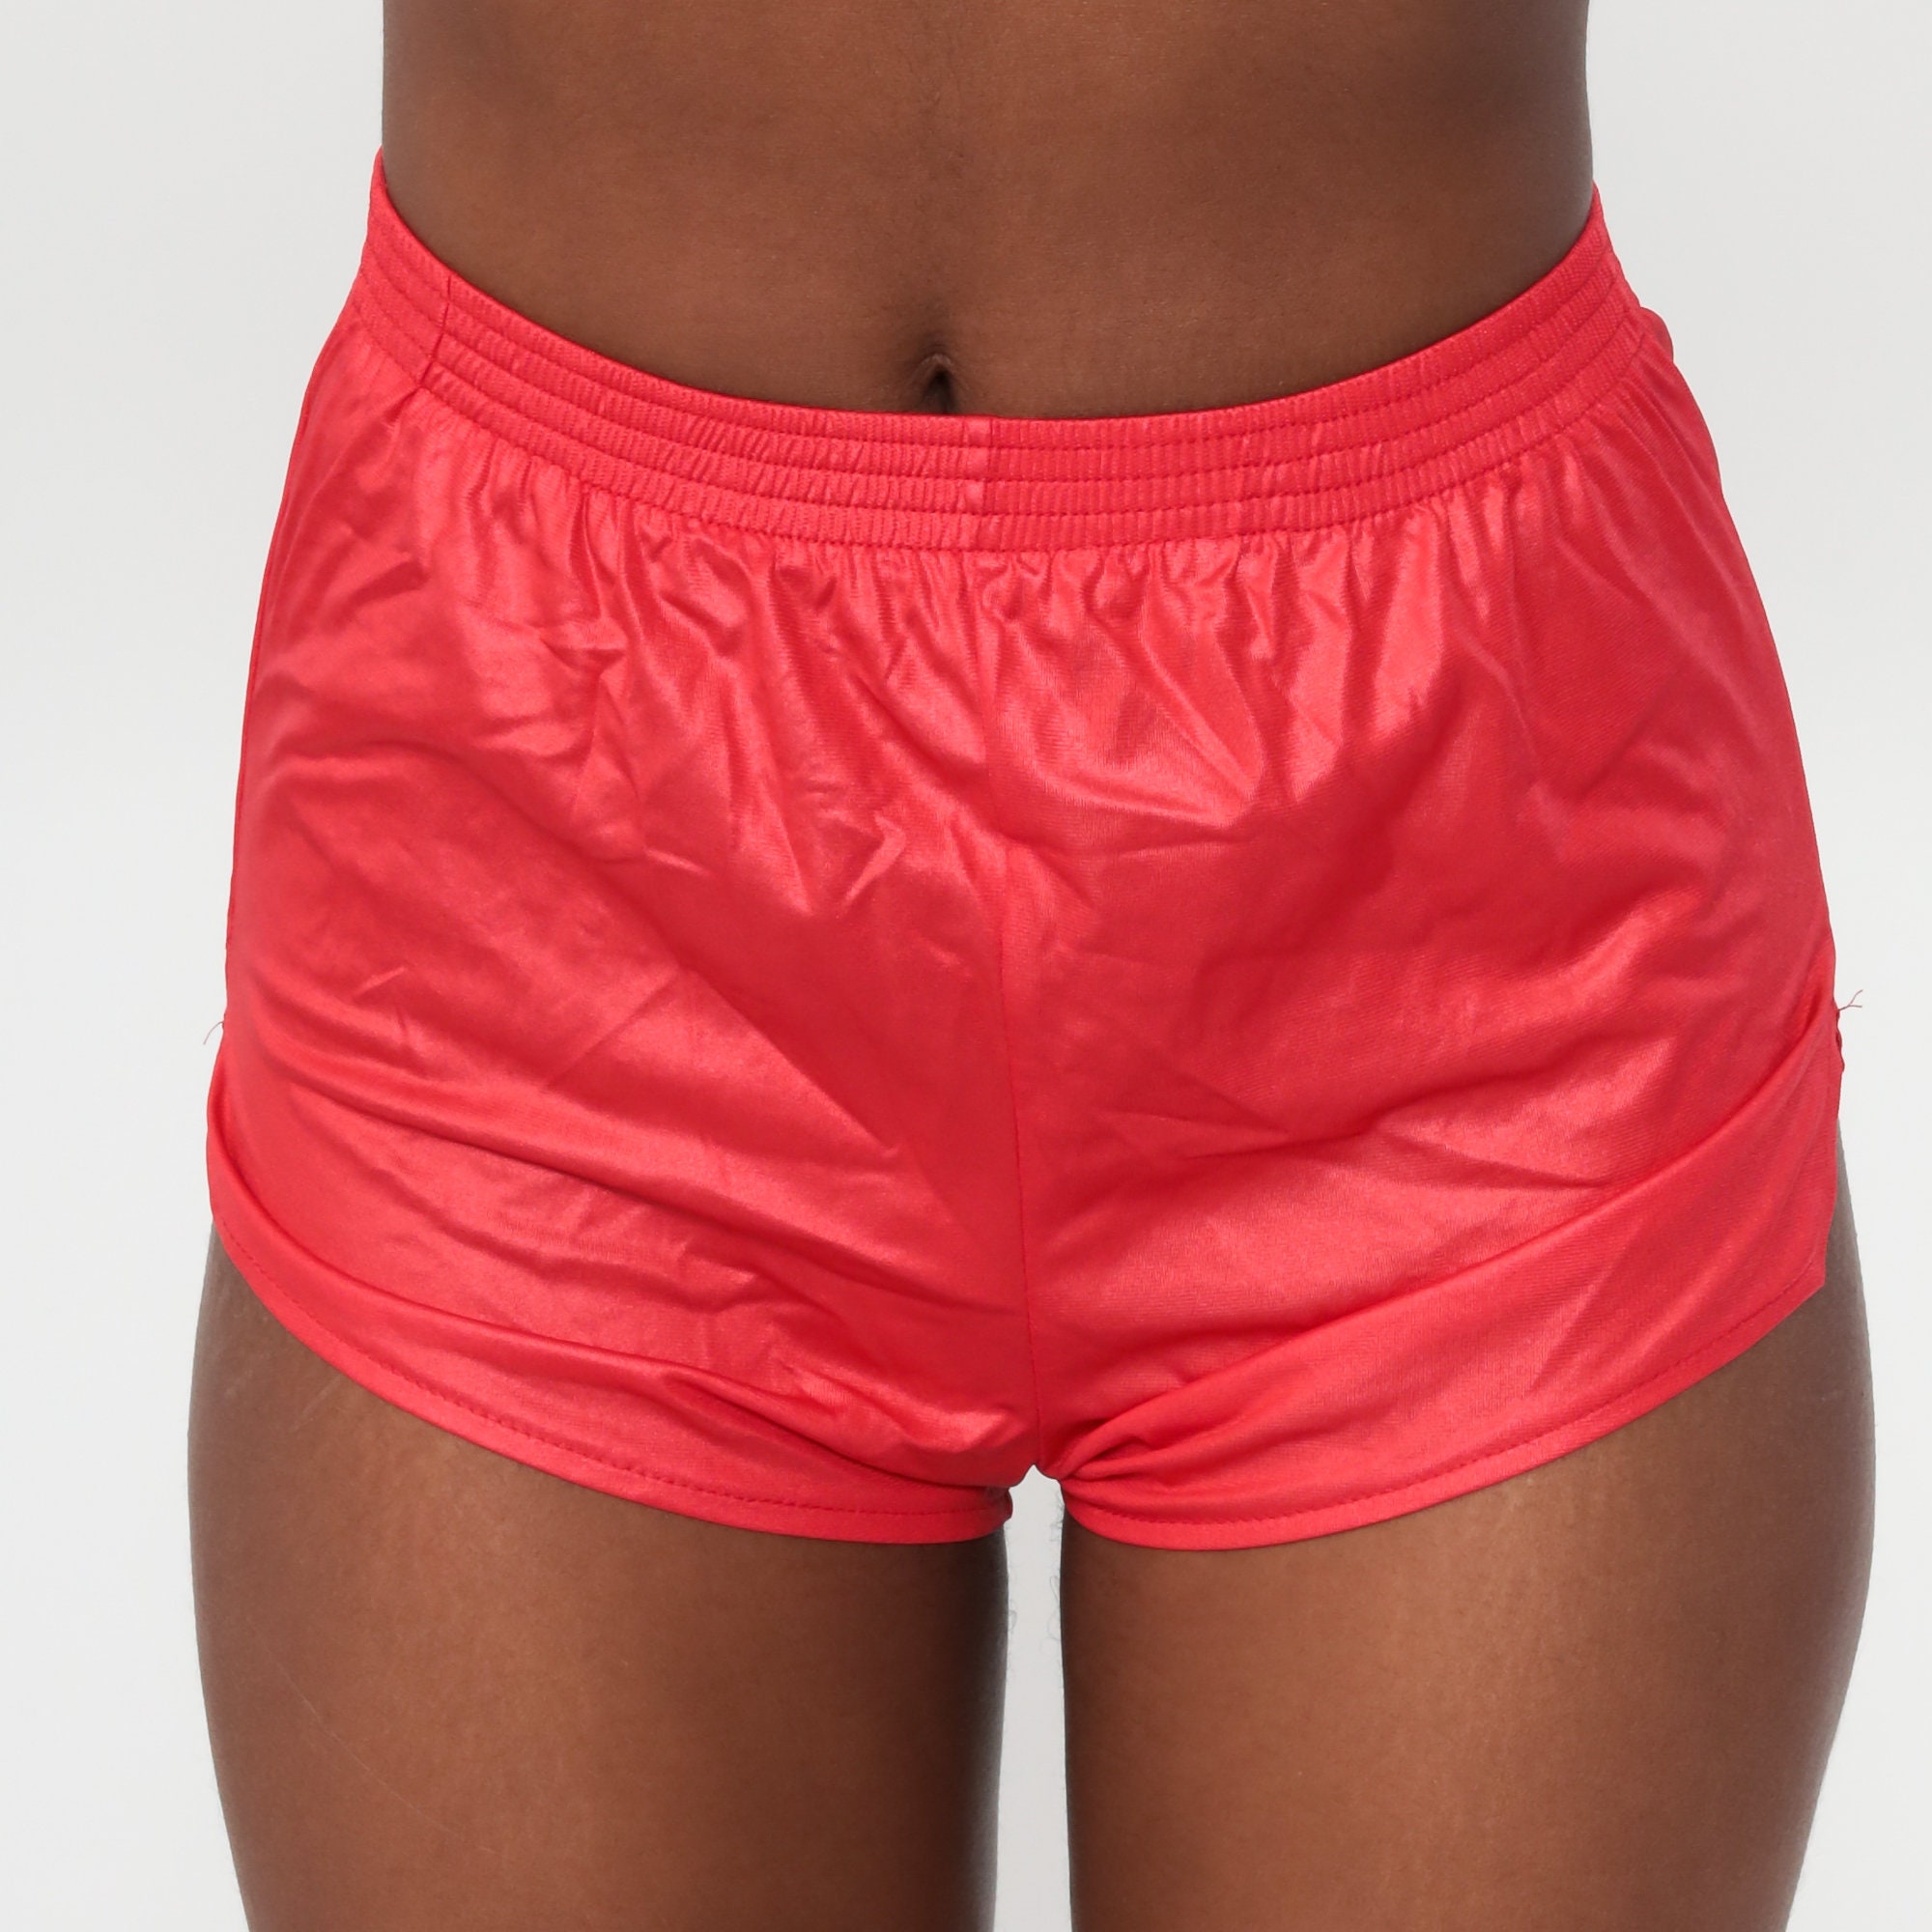 Simple Hind Workout Shorts for Gym